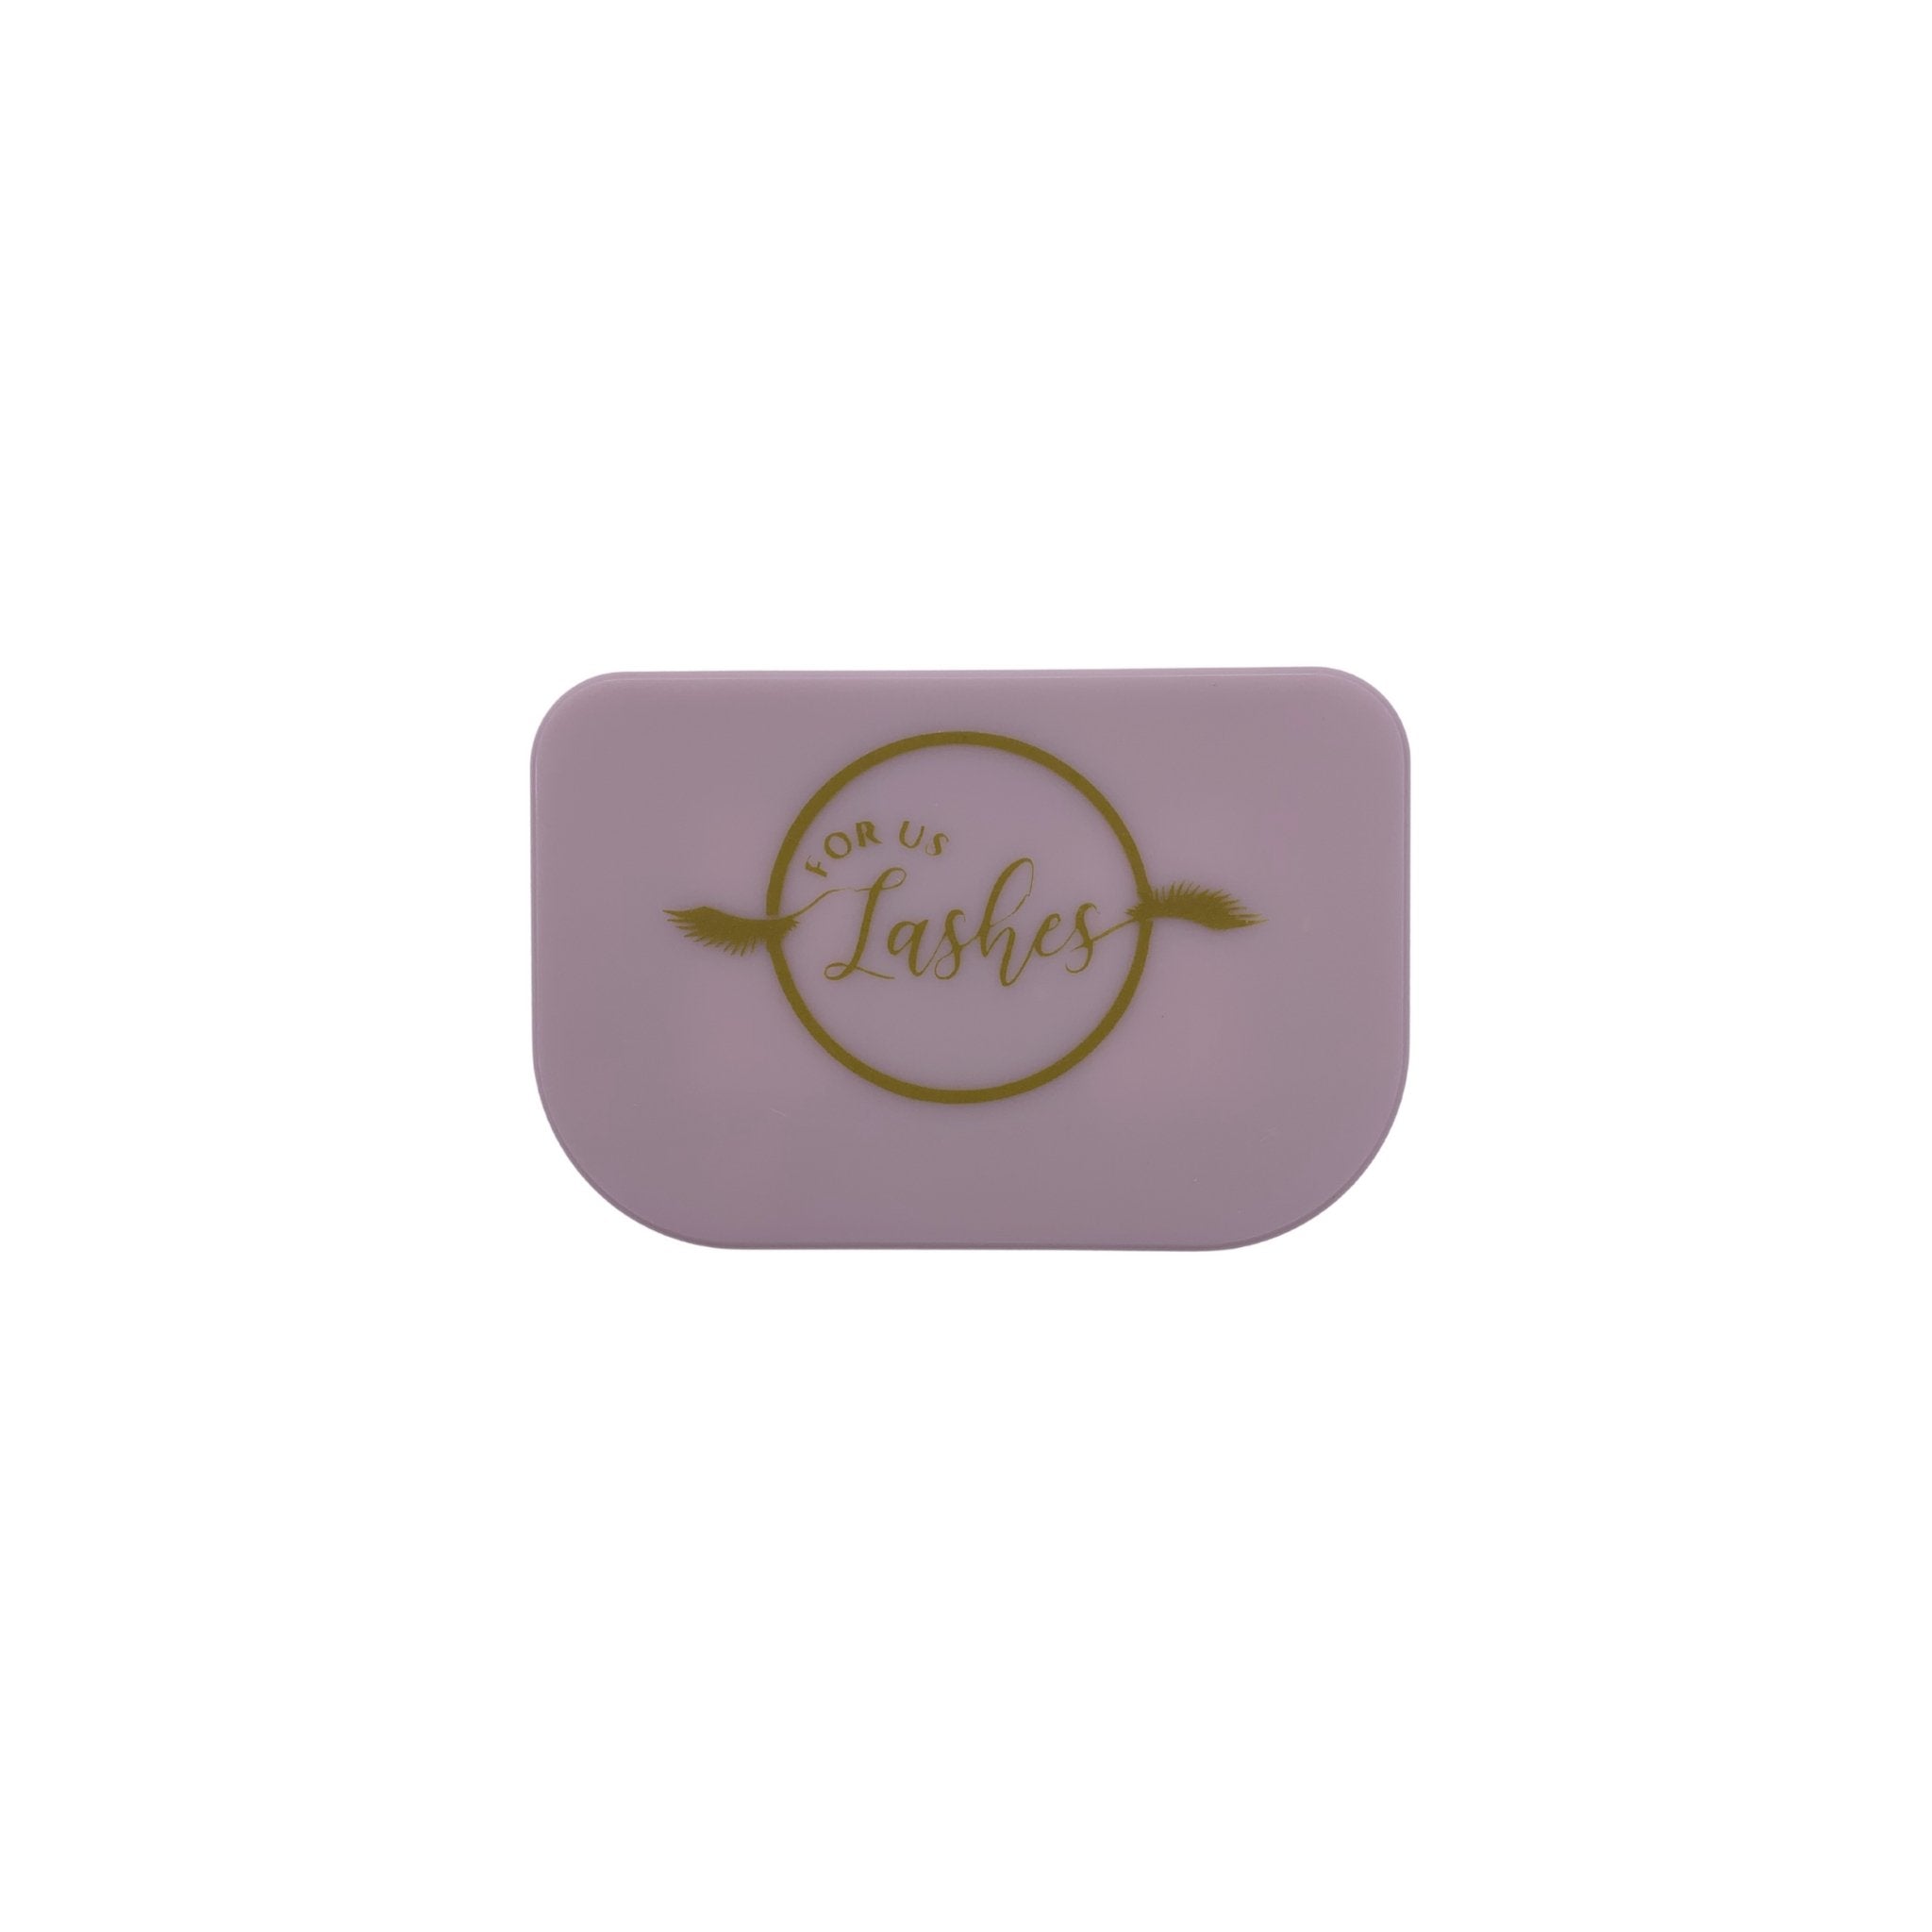 Nude Storage Case - For Us Lashes